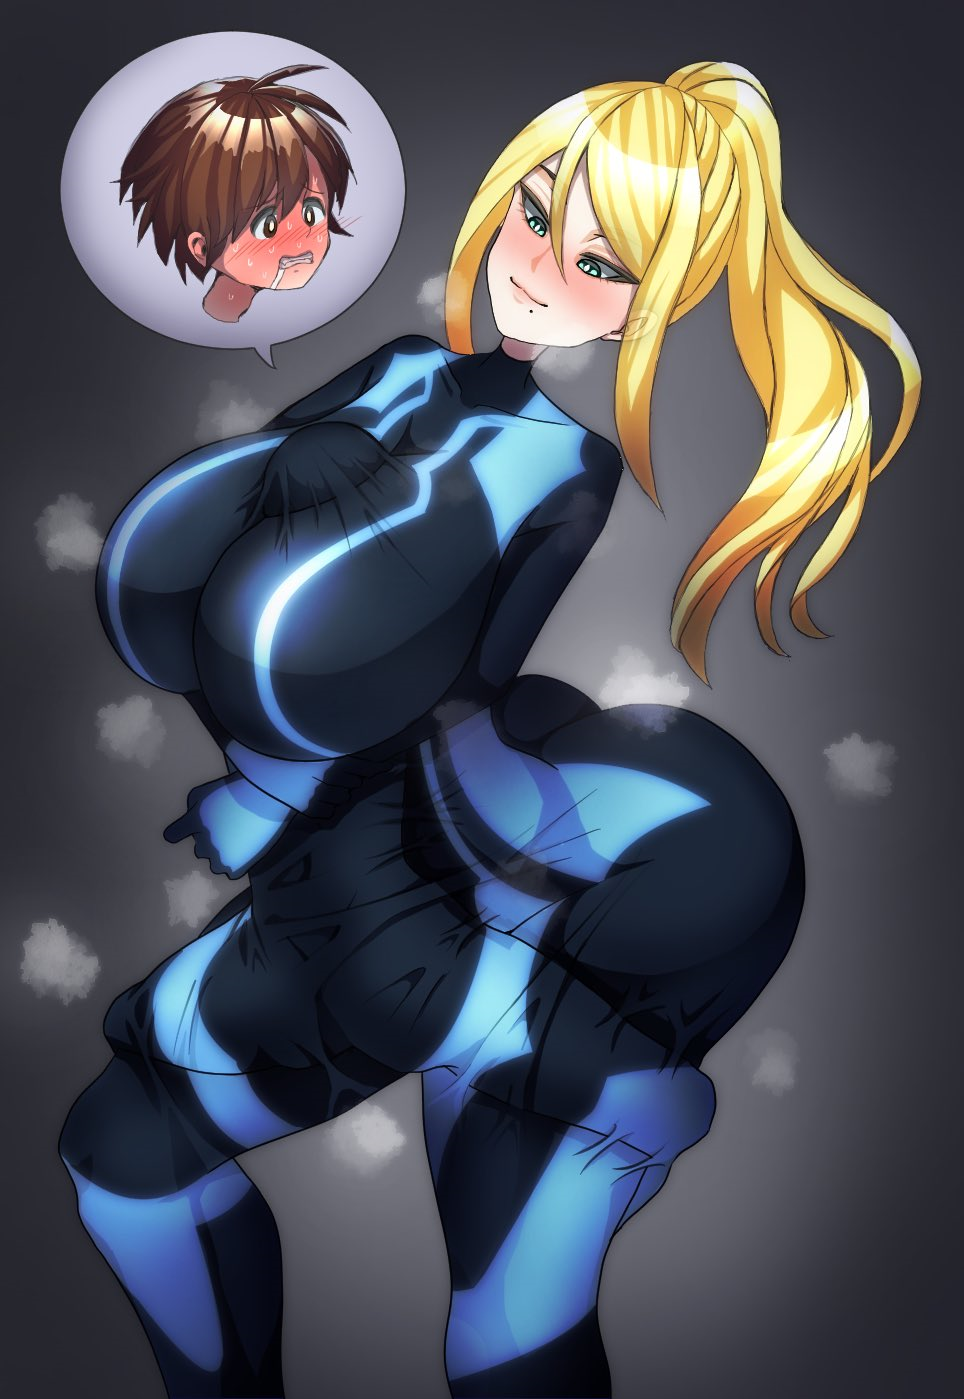 1boy 1boy1girl 1female 1female1male 1male 1male1female 1man 1woman arms_wrapped_around_partner artist_self-insert big_ass big_breasts big_butt black_suit blonde_female blonde_hair blonde_hair_female blush brown_hair clothes_entrapment clothing_entrapment dominant_female drooling entrapment female female_pred female_predator forced_sex forced_submission head_between_breasts helpless helpless_male high_quality high_resolution holding_partner implied_forced_sex implied_rape implied_sex implied_vaginal implied_vaginal_penetration looking_down_at_another looking_down_at_breasts looking_down_at_partner male_prey metroid metroid_dread metroid_fusion metroid_other_m metroid_prime metroid_prime_3:_corruption metroid_zero_mission mole mole_under_mouth nintendo ponytail reverse_rape samus_aran shared_clothes skintight_bodysuit skintight_clothes skintight_clothing skintight_suit smirking smirking_at_another smirking_at_partner smothered smothering_breast smothering_breasts submissive_male swordkingx5 tight_clothes tight_clothing tight_fit trapped trapped_in_breasts trapped_in_clothing unwilling_prey zero_suit zero_suit_samus